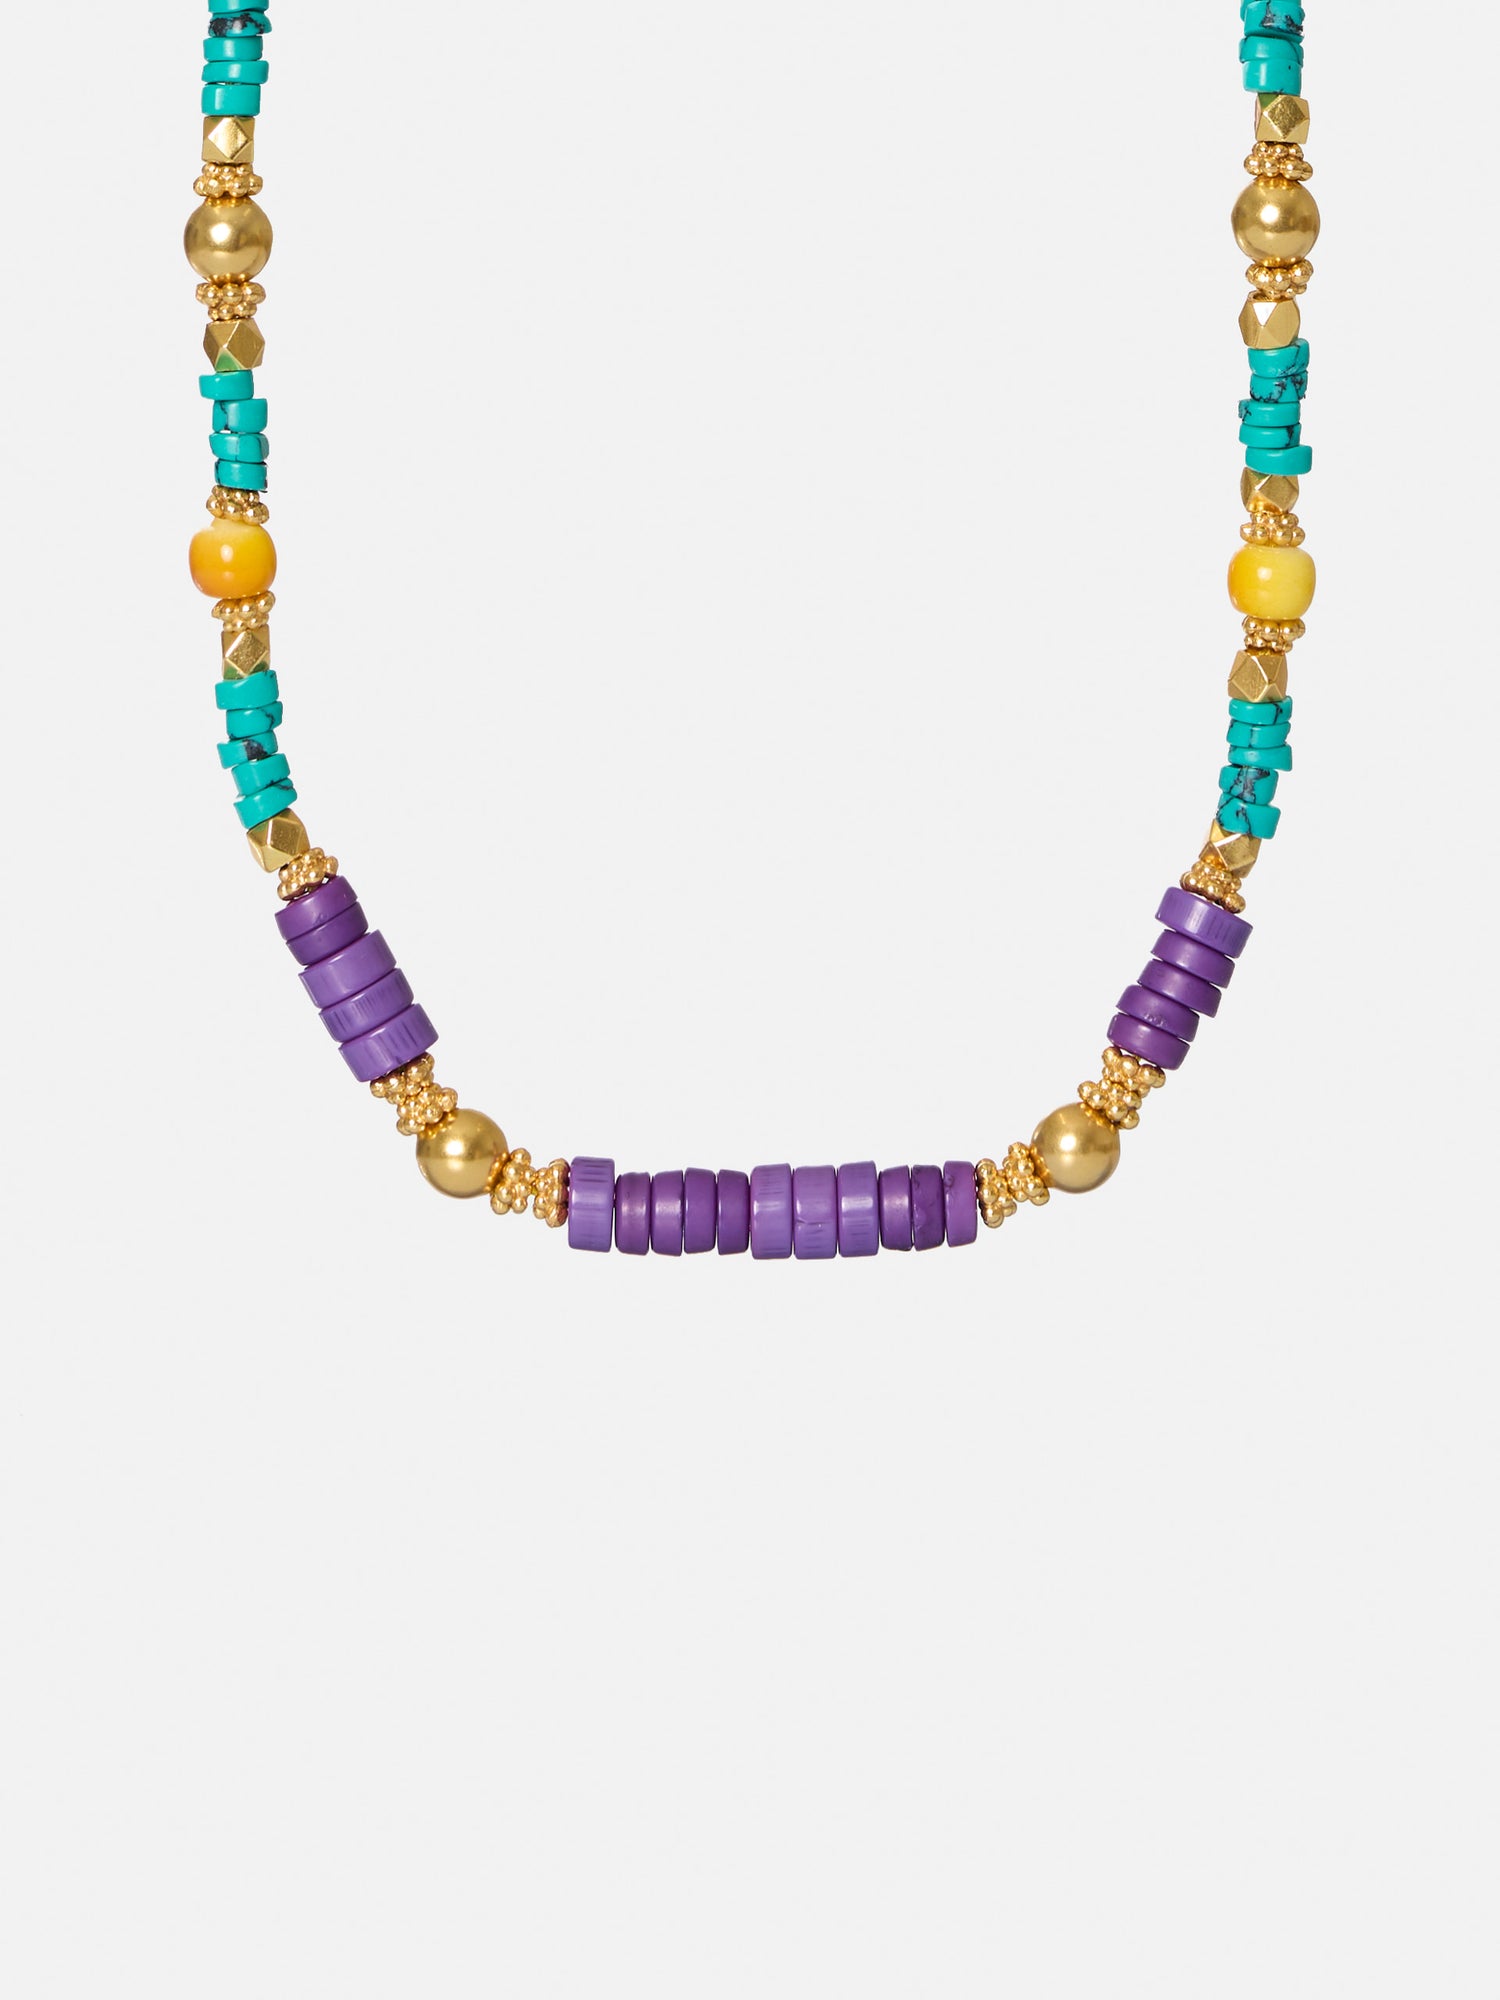 Colorful stone necklace